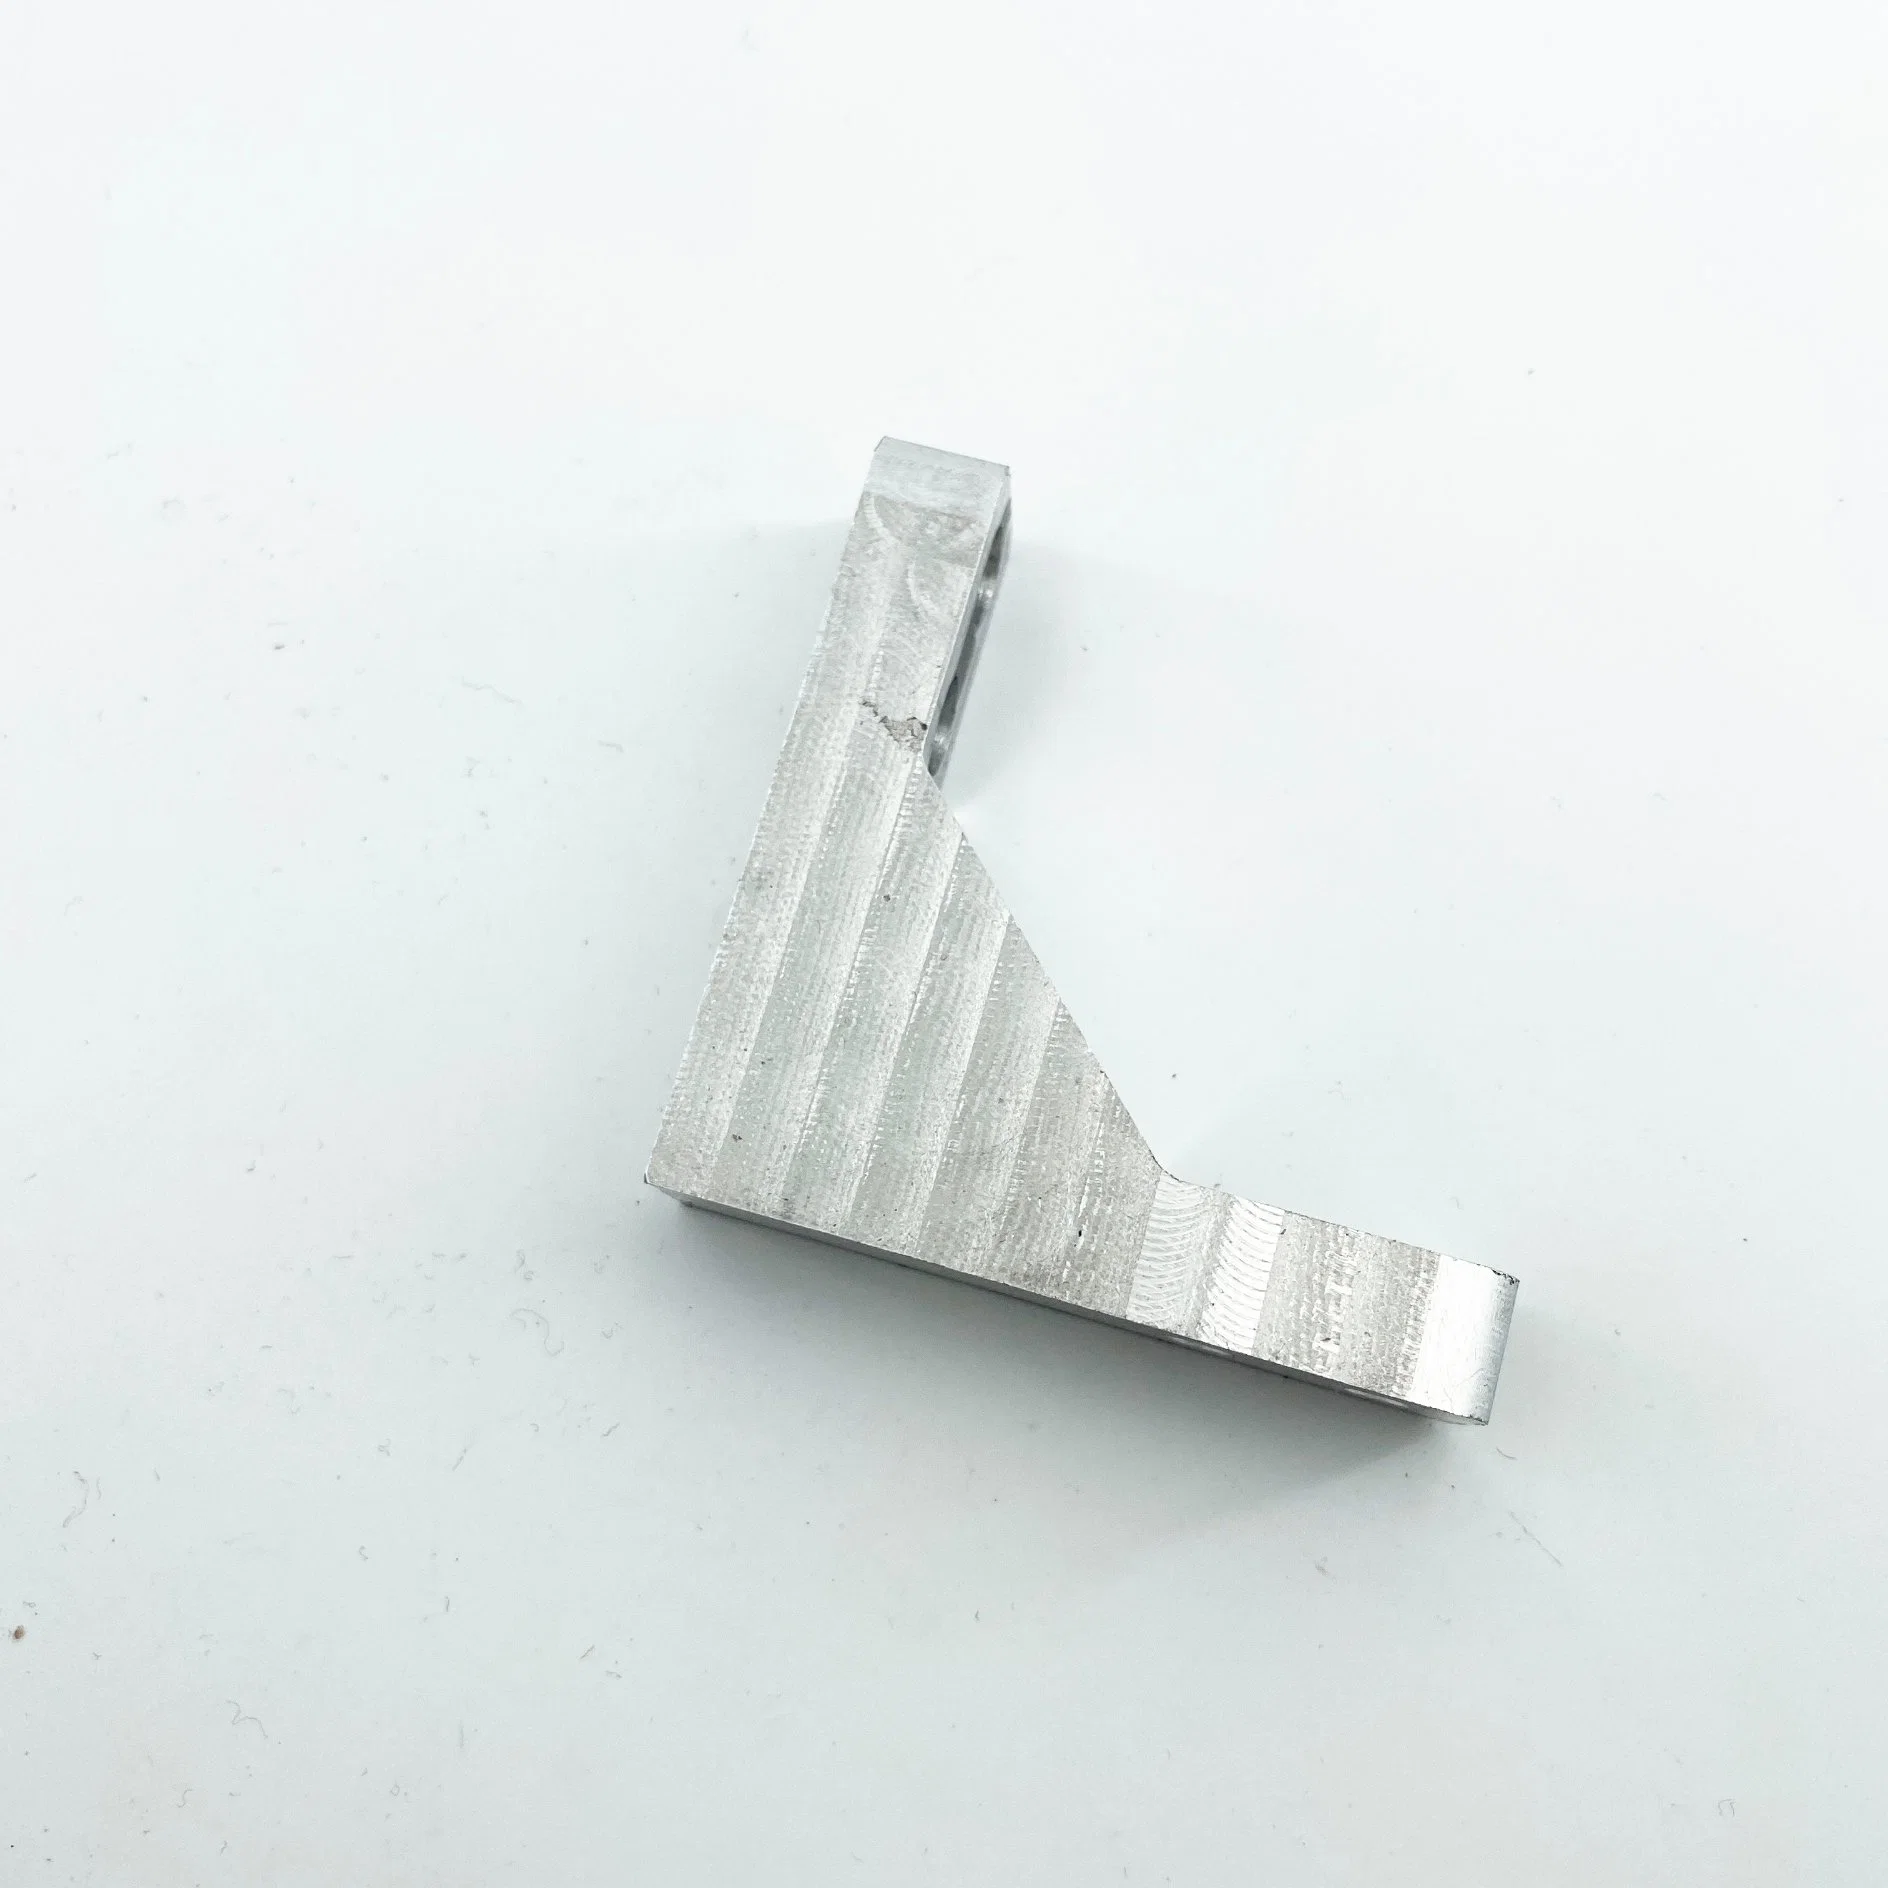 Custom High Precision Aluminum Alloy Mold Precision Stainless Steel Metal Parts CNC Machining